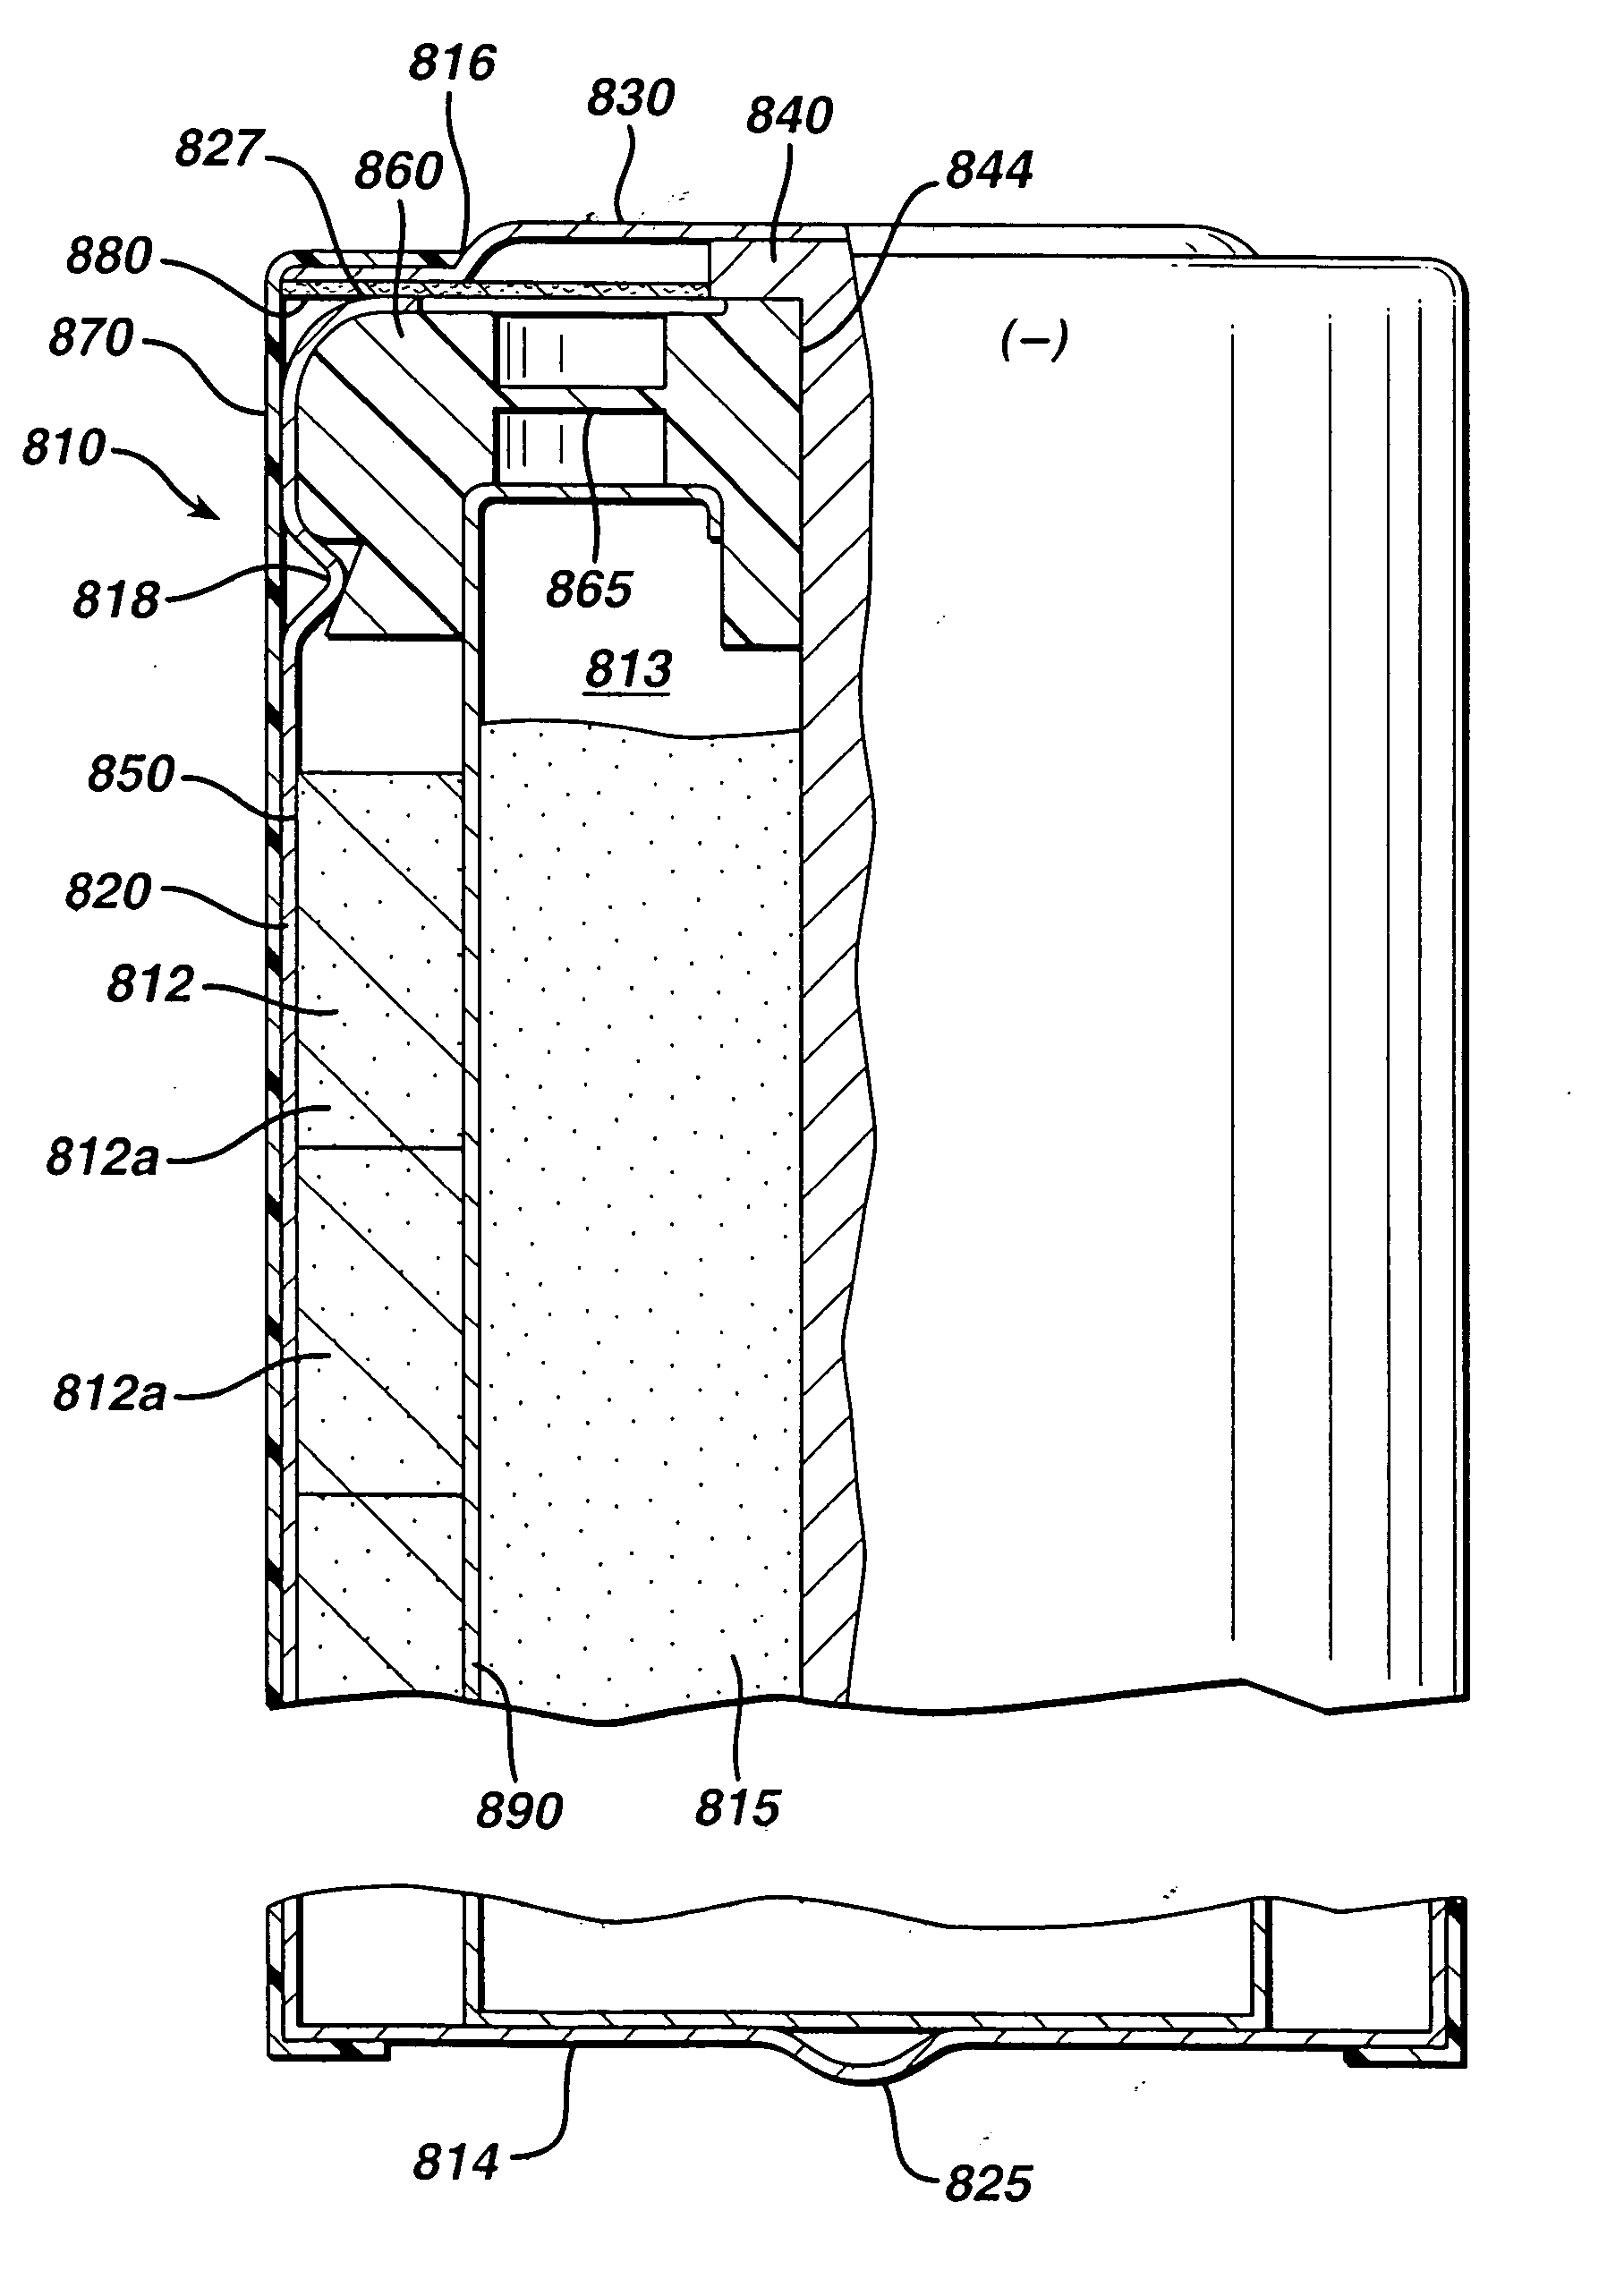 Alkaline cell with improved anode